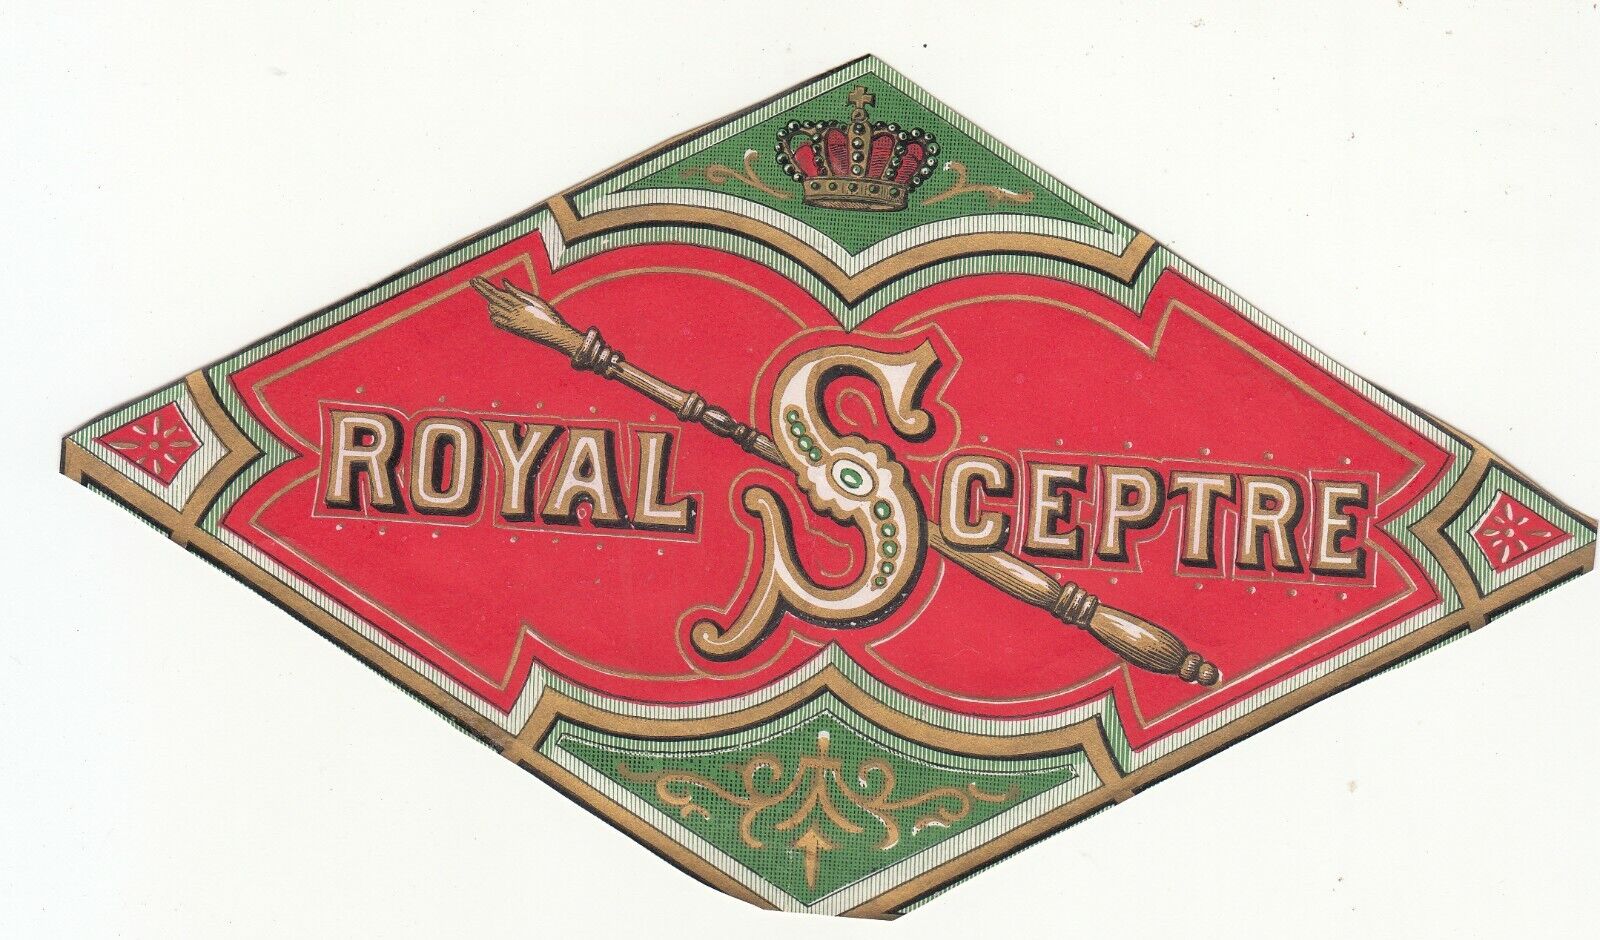 Royal Sceptre Red & Green Gold Crown Vict Label c1880s